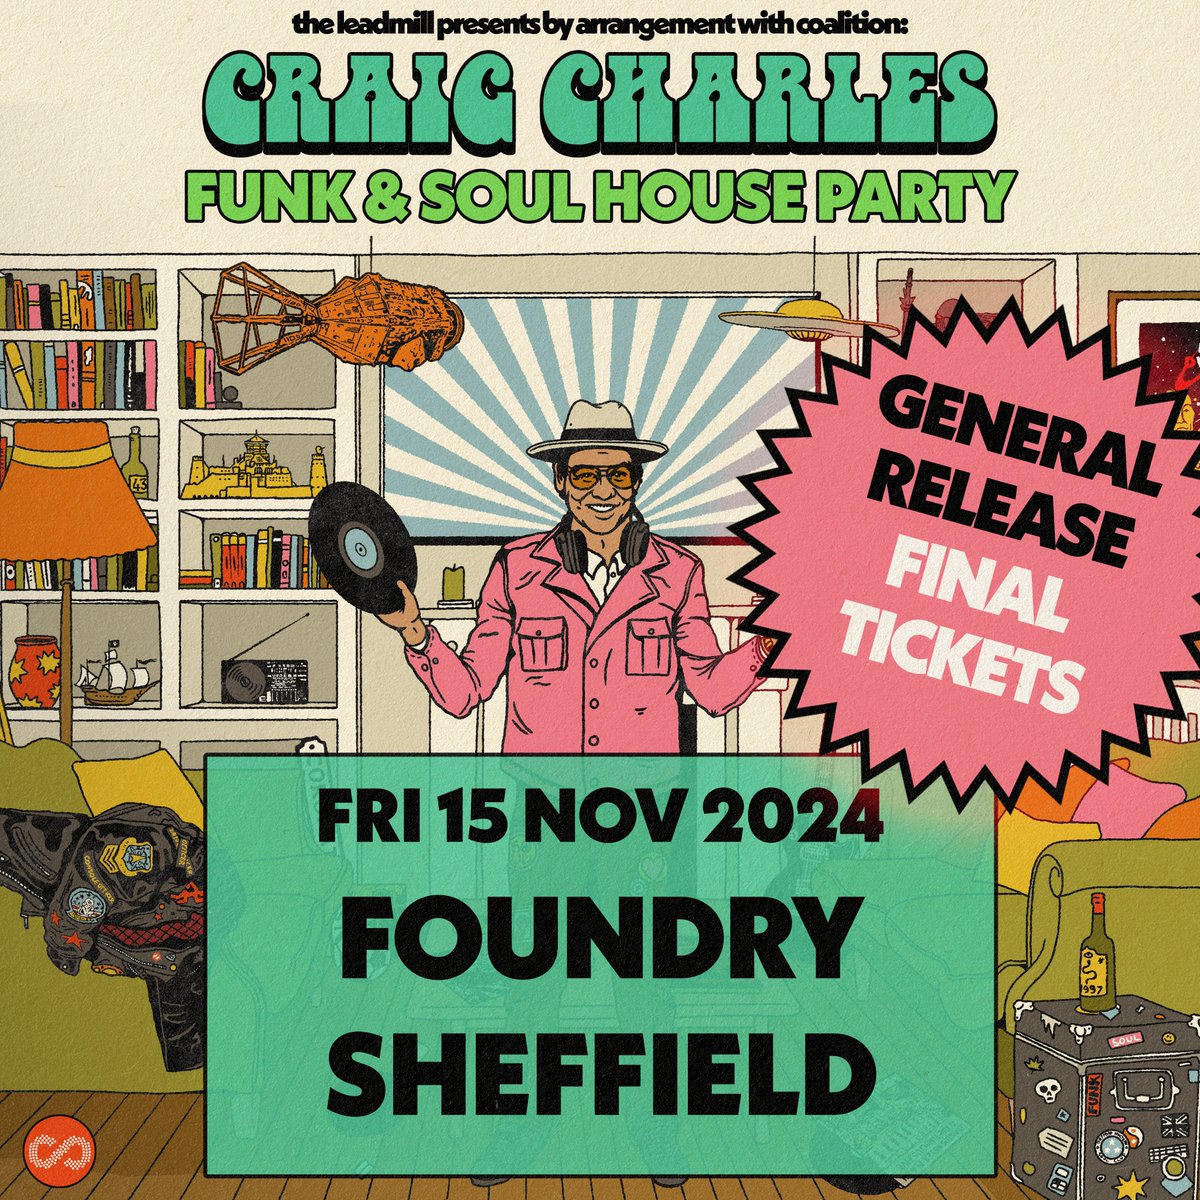 It may be a while away, but a big chunk of tickets for the Sheff return of @CCfunkandsoul have flown out already, presumably cause it's the finest evening of funk and soul goodness you'll find 🪩 @Foundrysu is the place to be, you'll wanna act sharpish > leadmill.co.uk/event/craig-ch…